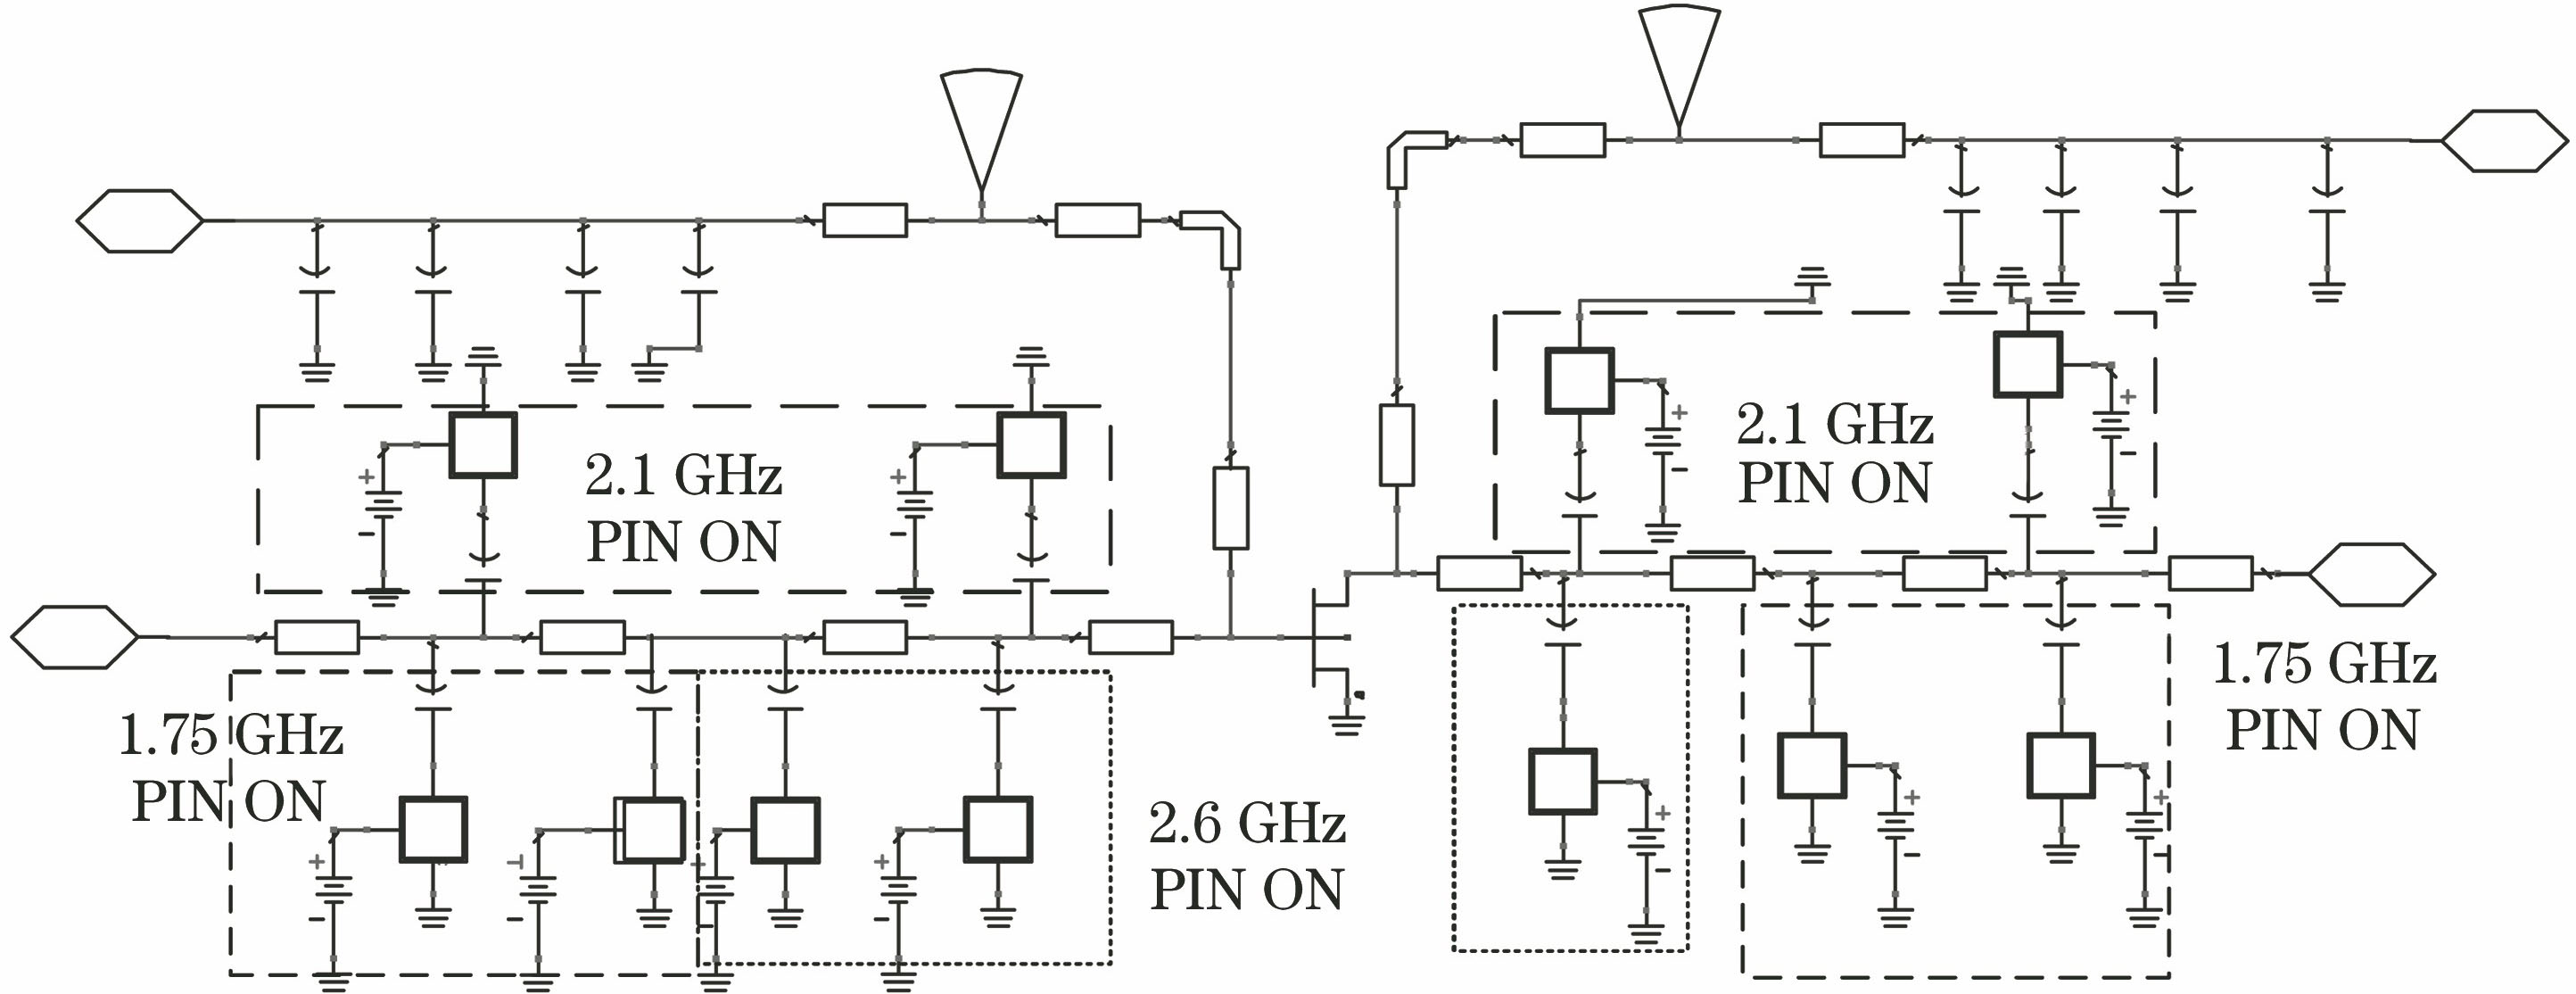 Overall circuit diagram of reconfigurable power amplifier